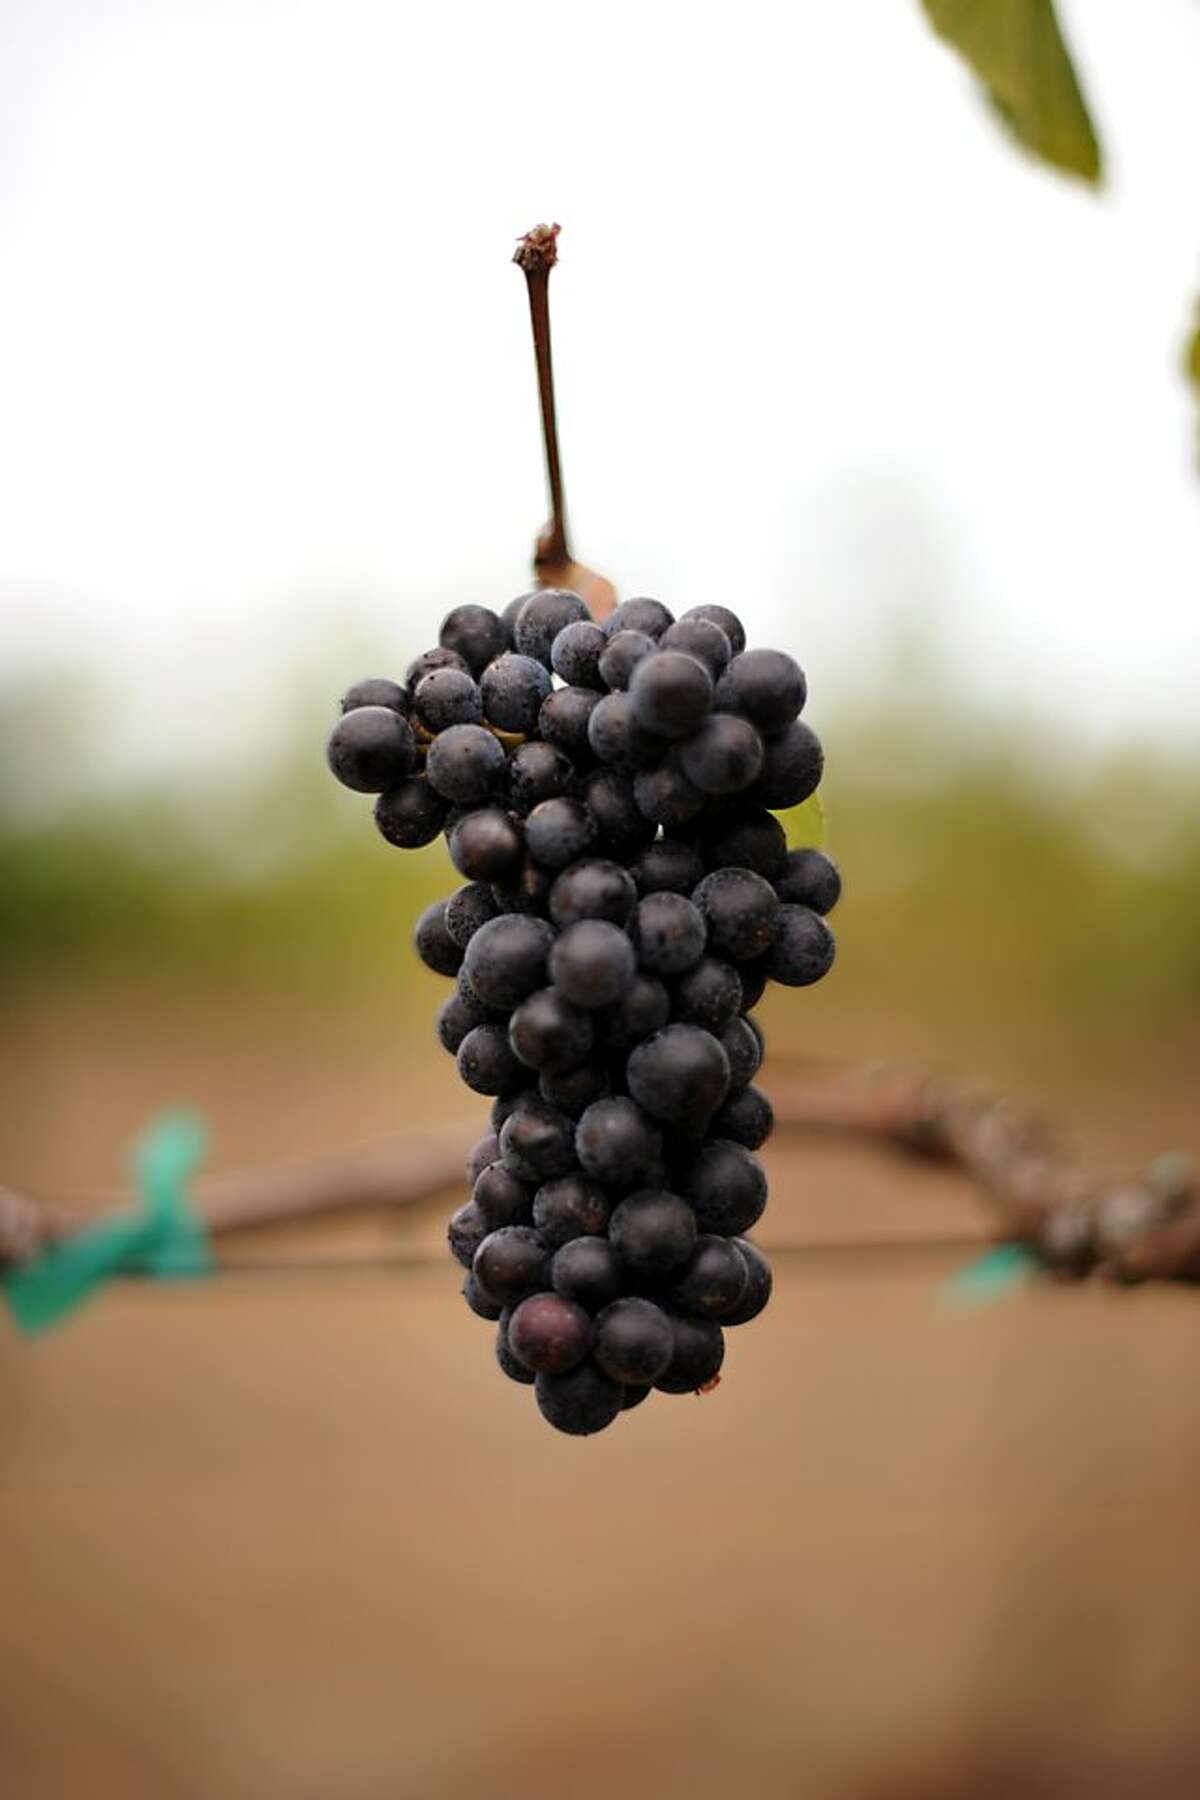 The Kiser vineyard in Philo, California in the Anderson Valley is planted with Pommard and a variety of Dijon clones of pinot noir grapes. September 30, 2011